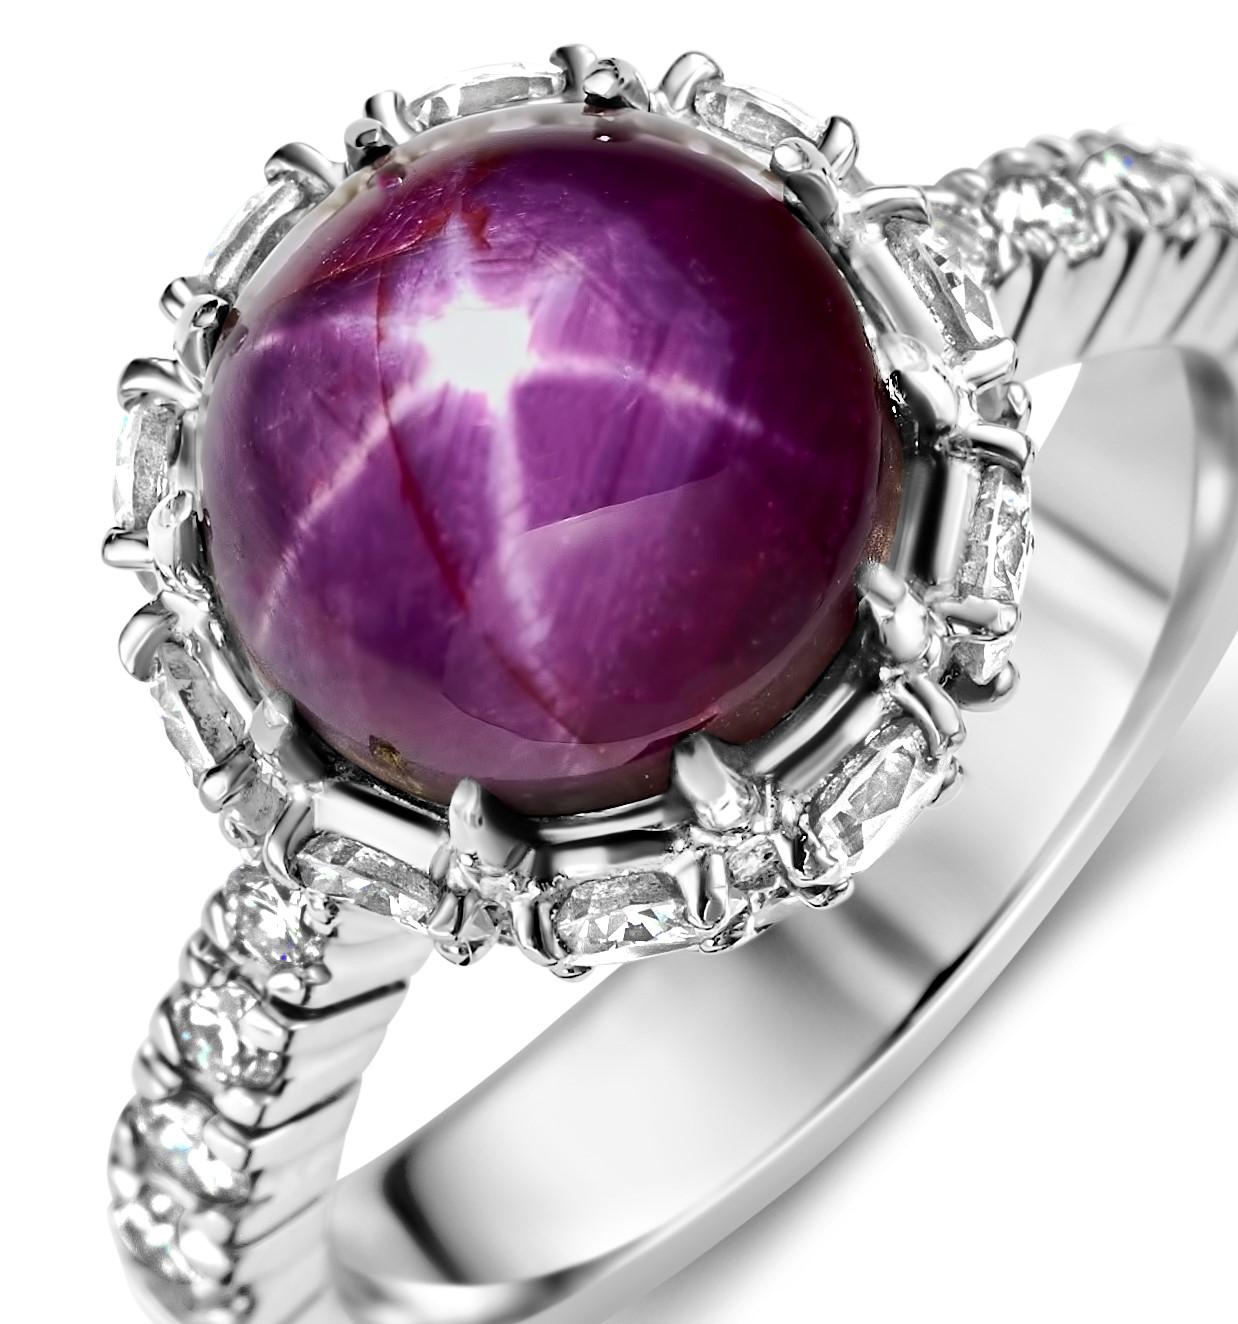 Amazing 18kt White Gold Ring With No Heat Star Ruby 6.11ct, Diamonds 1.83ct 

Ruby: Intense Purple Red, Cabochon Star Ruby, No indications of heating. Comes with Carat Gem Lab Certificate CGL28027

Diamonds: Brilliant cut diamonds, together 1.83 ct.